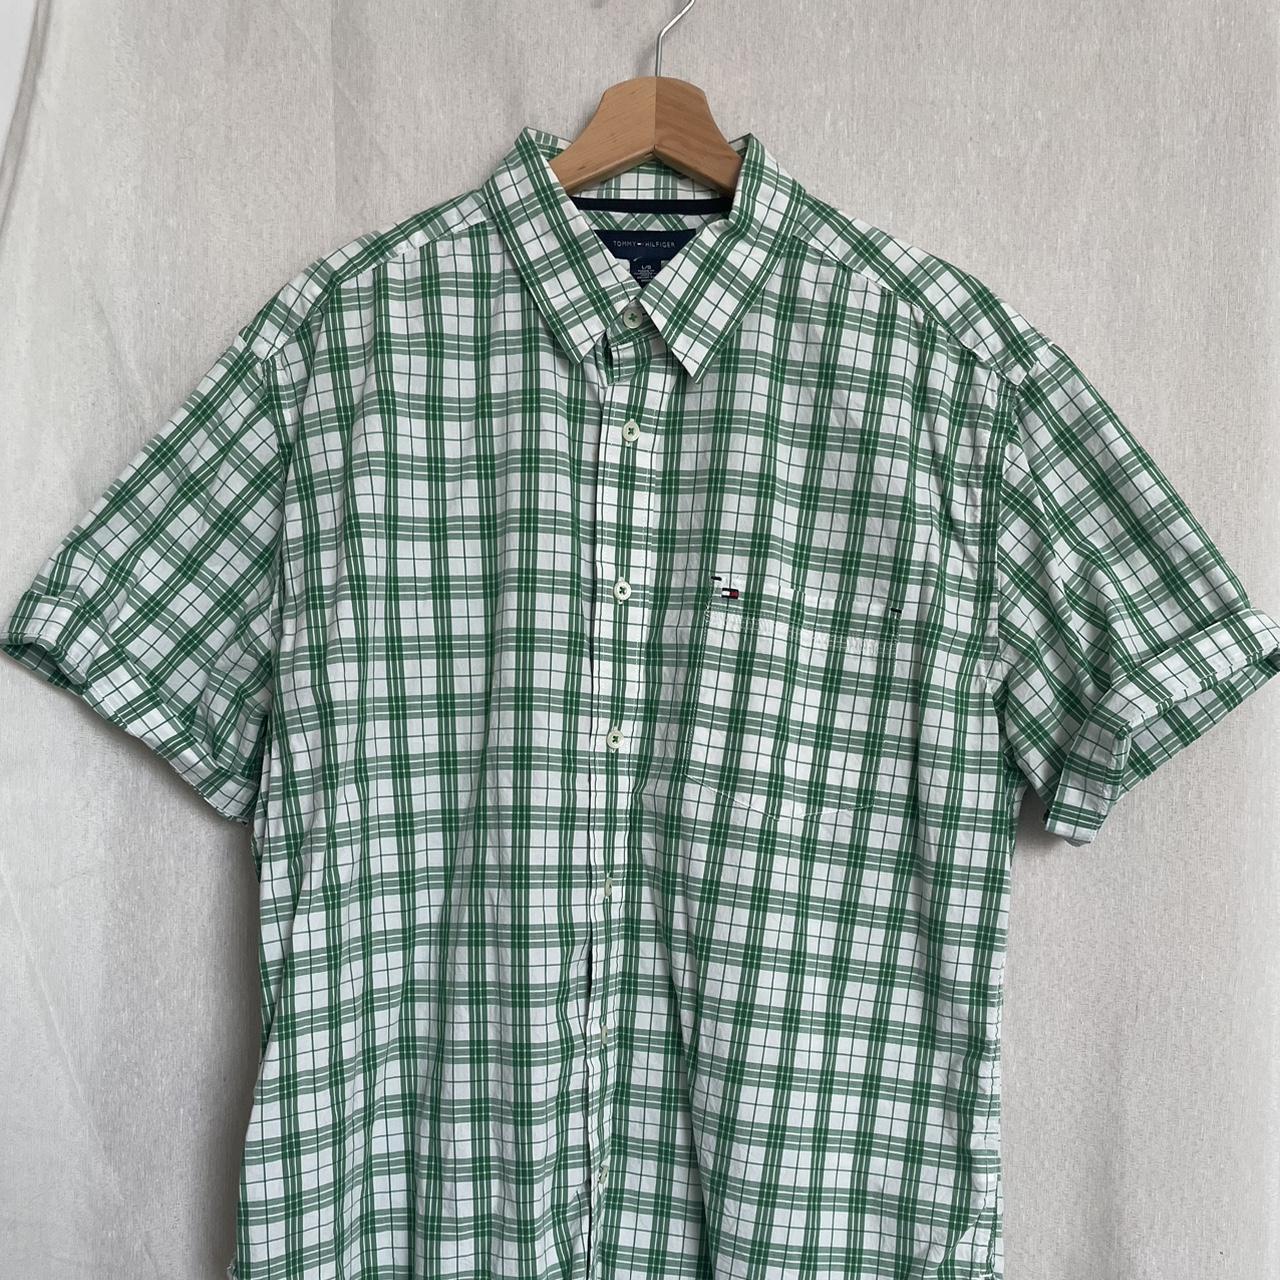 Tommy Hilfiger white and green checked shirt. Fits... - Depop